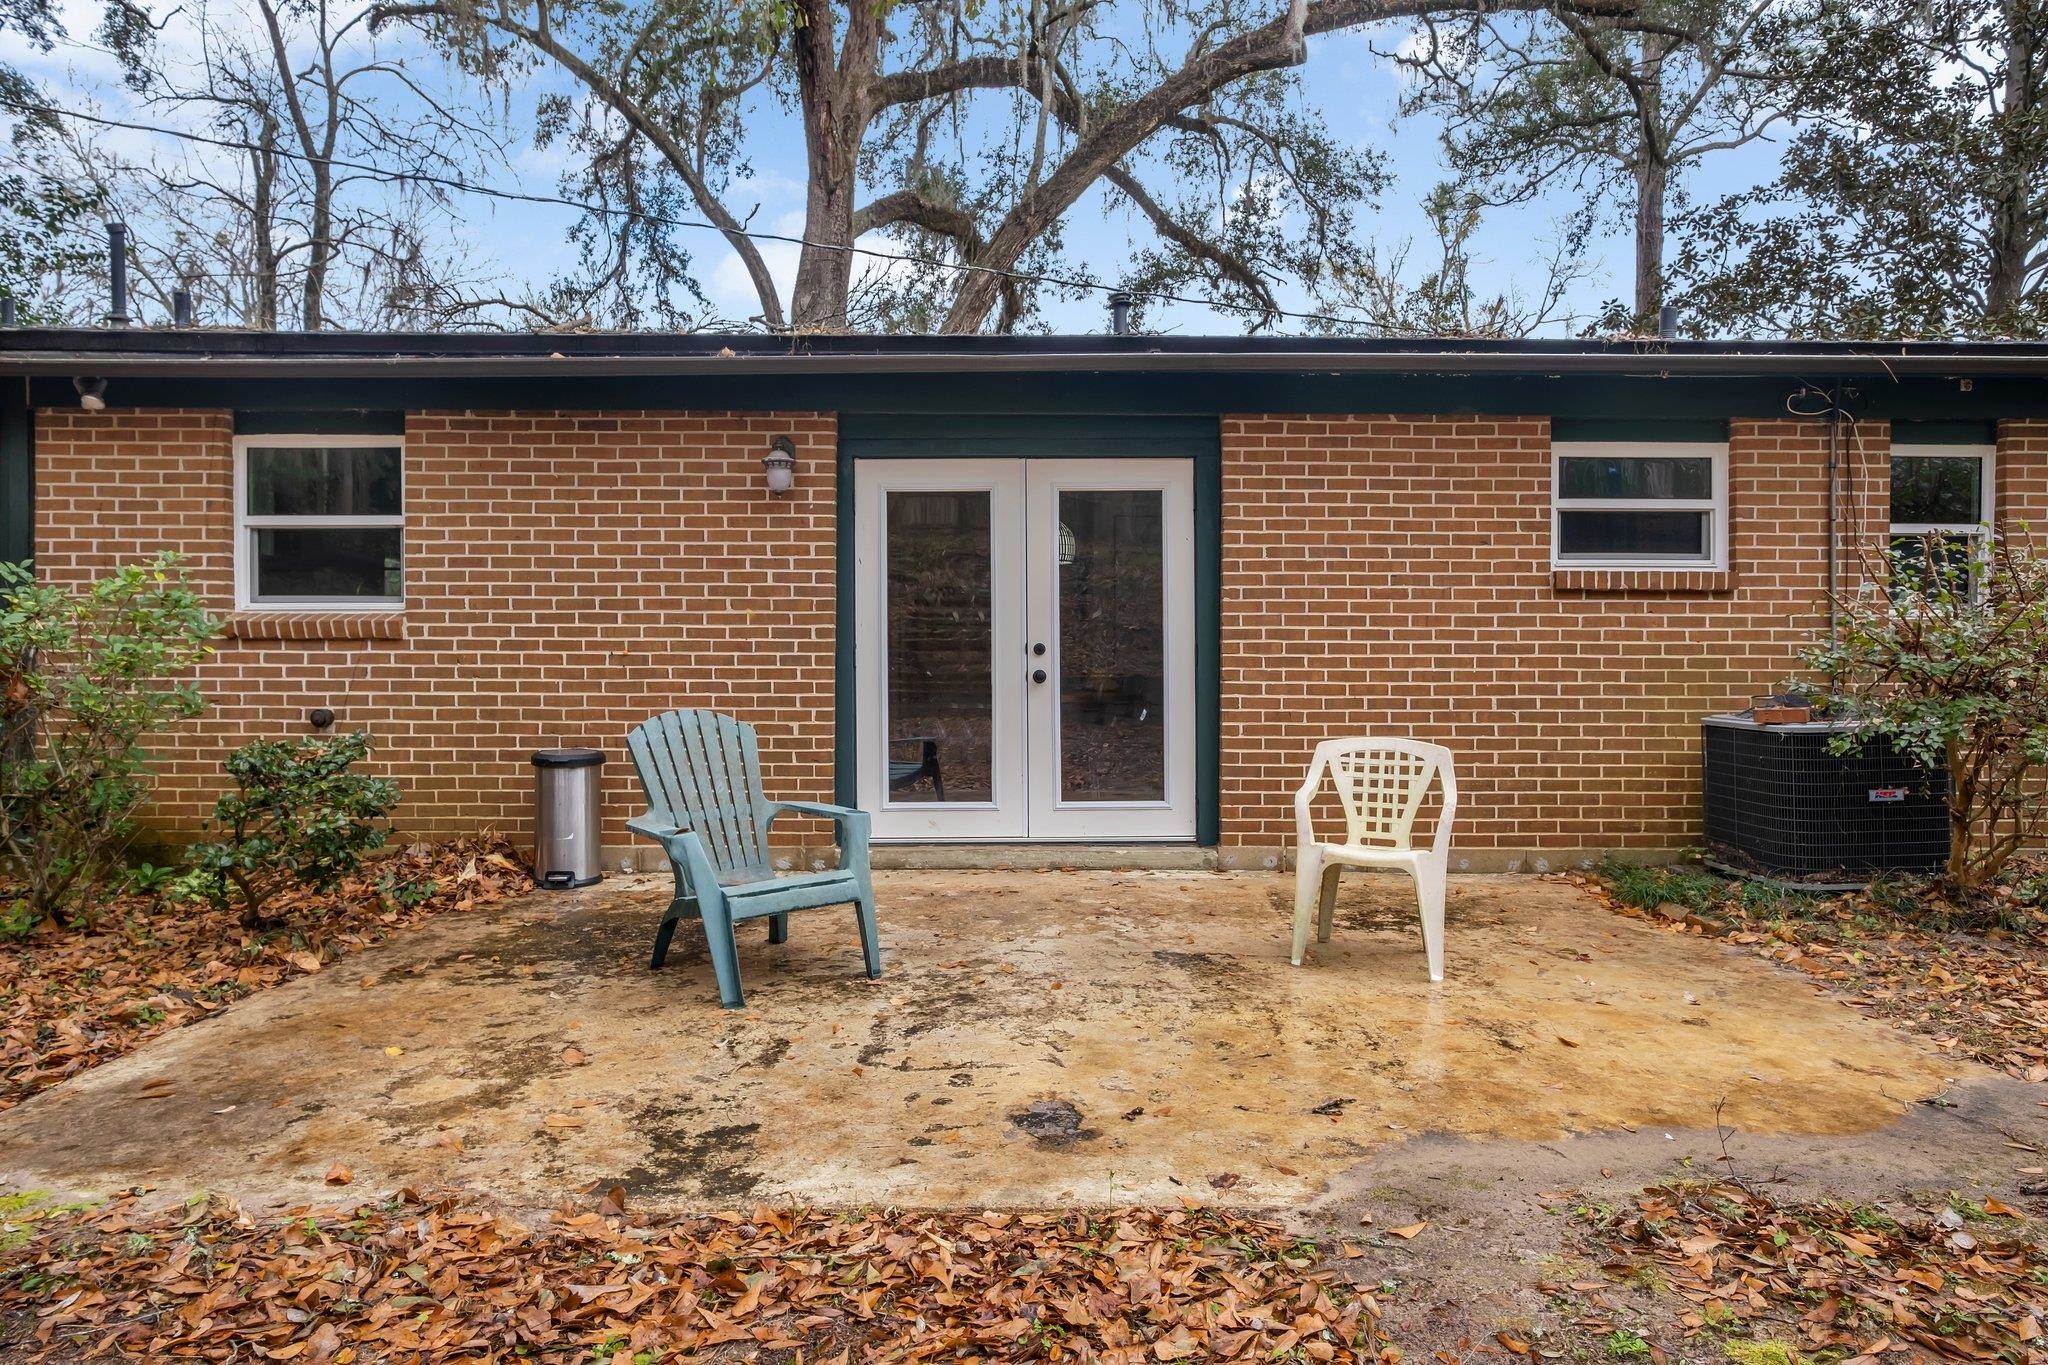 921 Willow Avenue,TALLAHASSEE,Florida 32303,2 Bedrooms Bedrooms,2 BathroomsBathrooms,Detached single family,921 Willow Avenue,367836